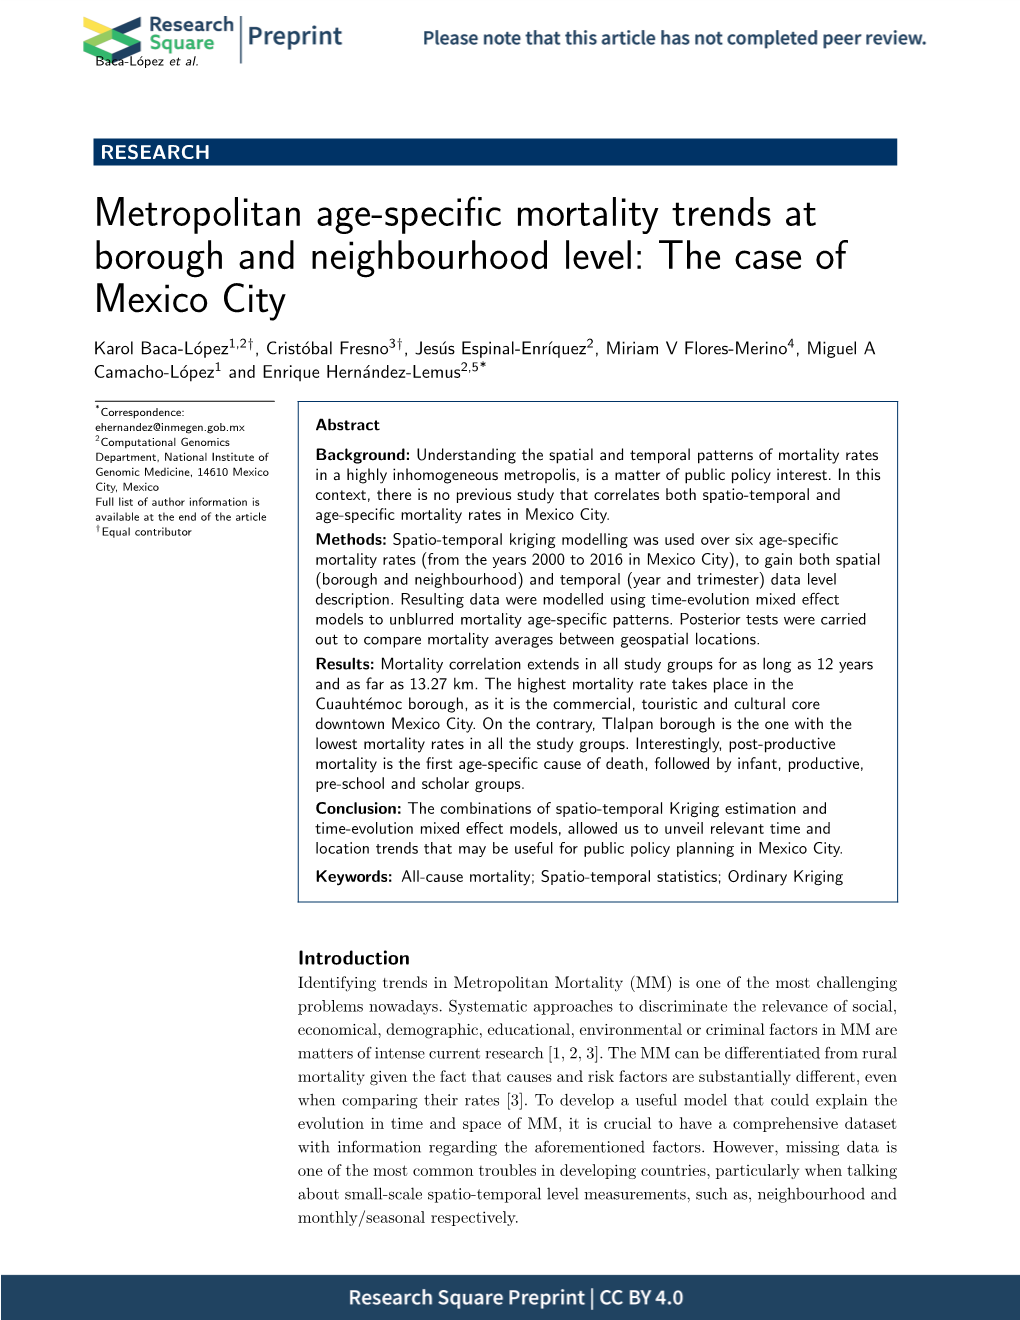 Metropolitan Age-Specific Mortality Trends At